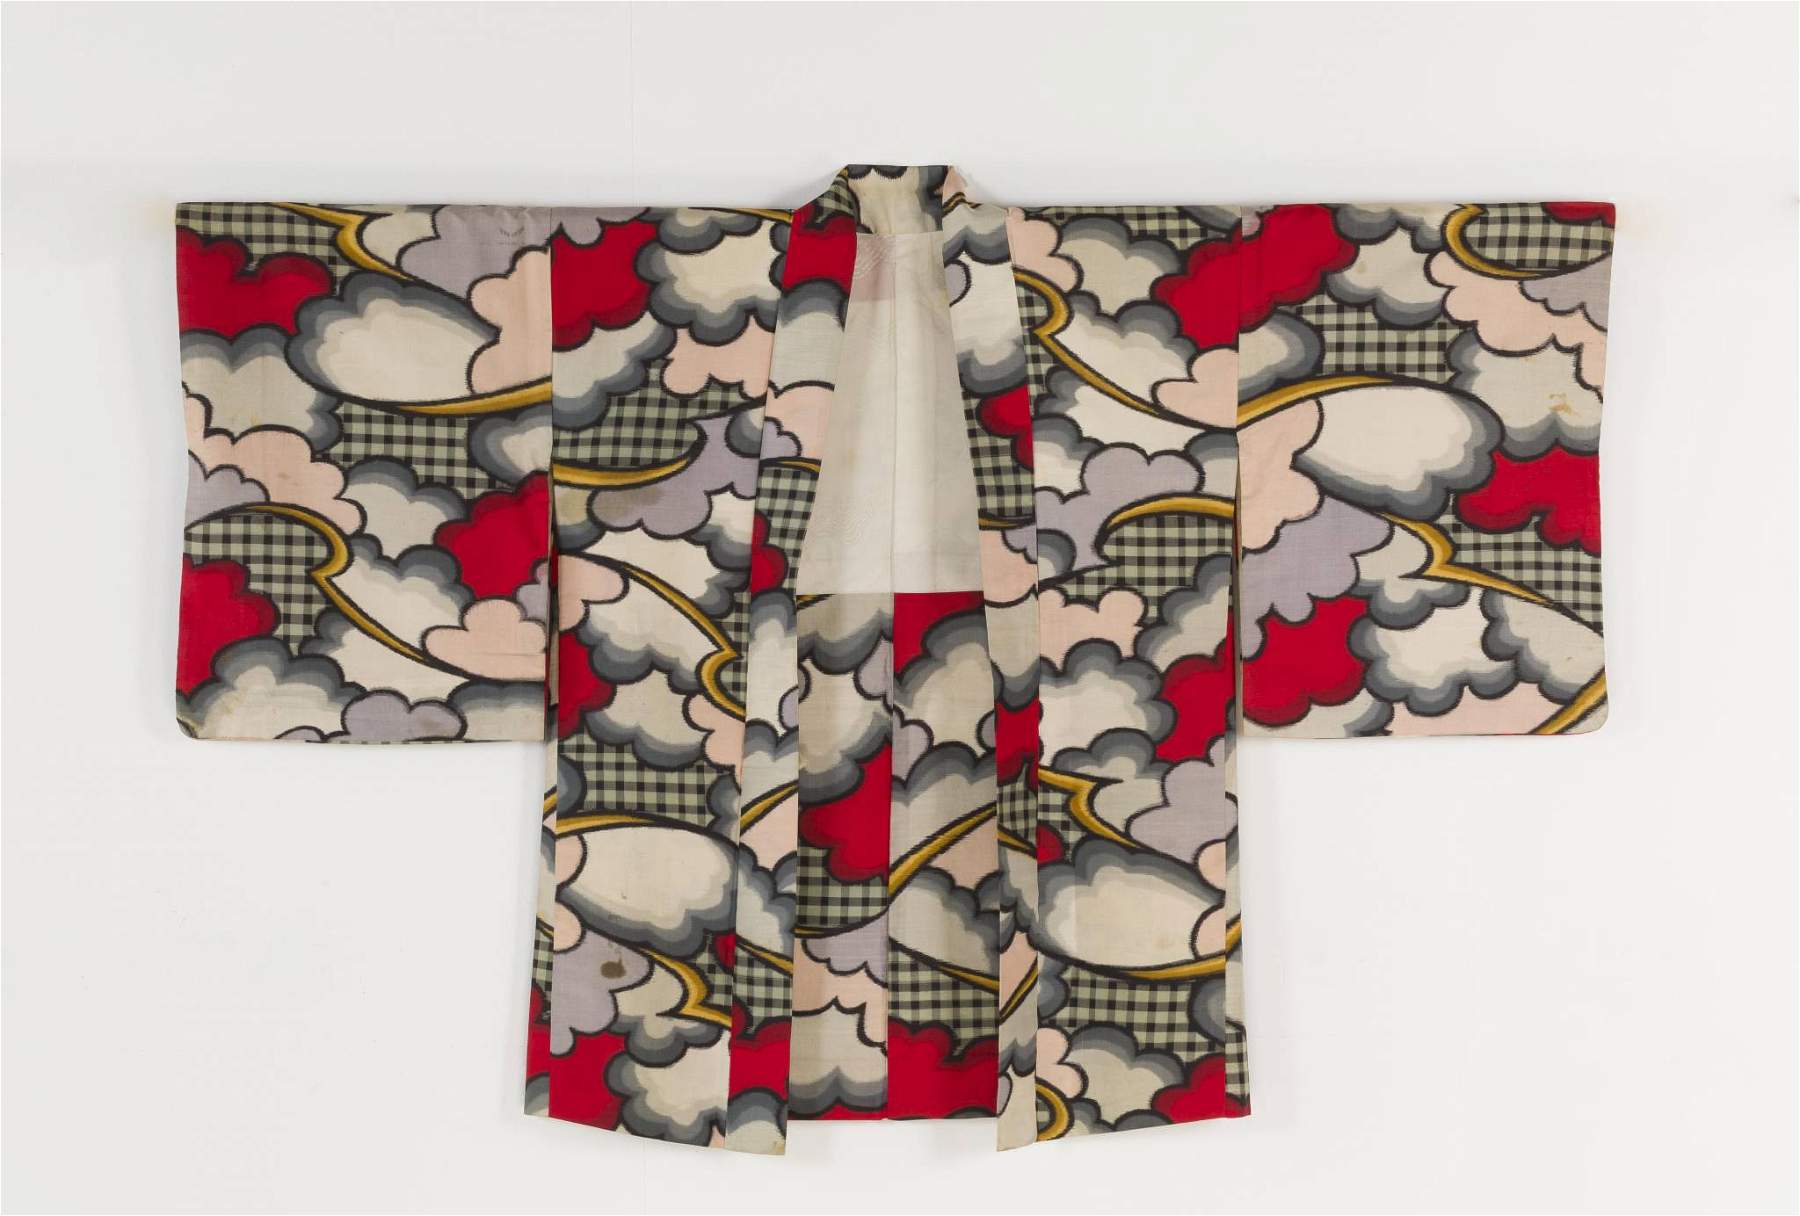 An exhibition on kimonos from the first half of the 20th century in Gorica